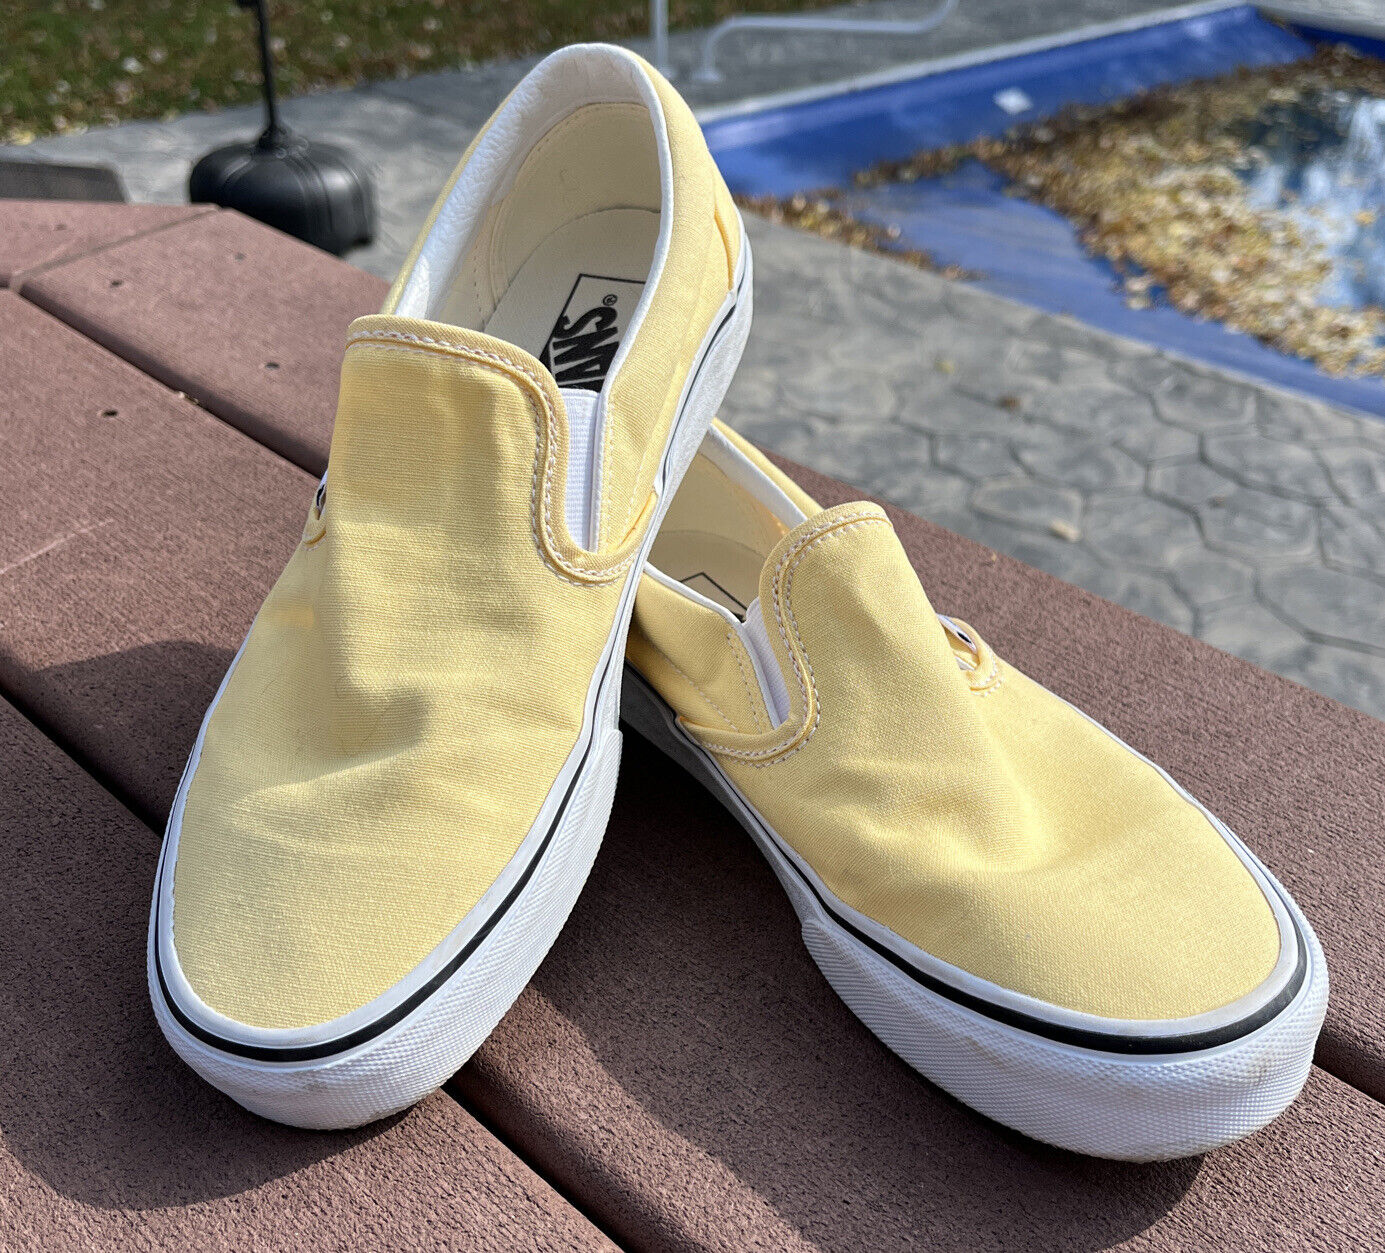 Vans Slip On Unisex Shoes Sneakers Casual Skate Style Canvas Never Worn